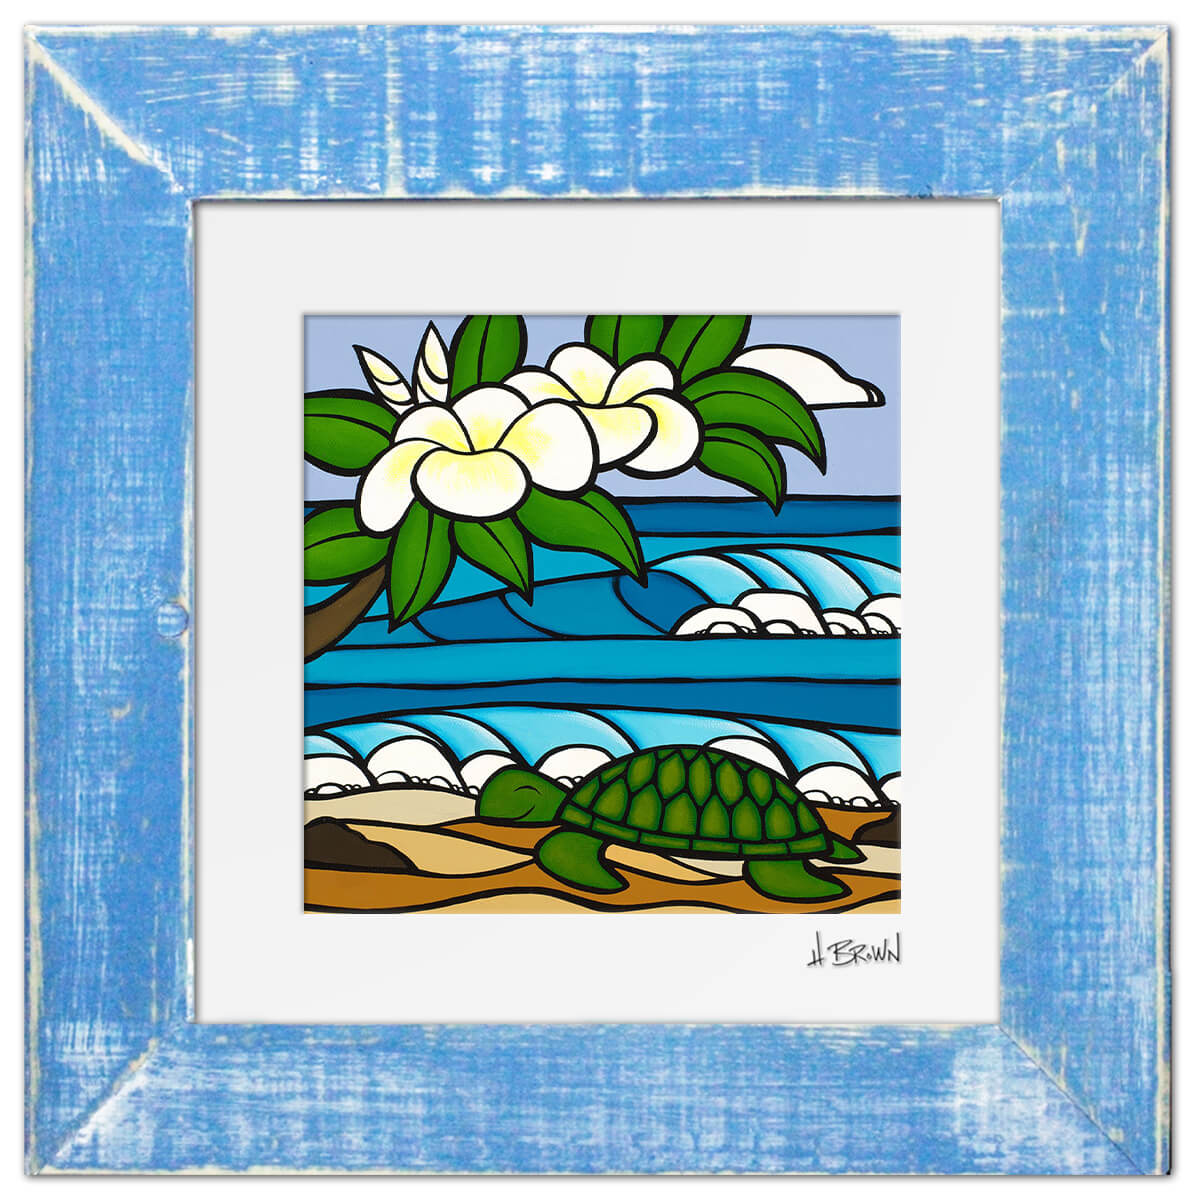 Blue framed matted art print by Hawaii artist Heather Brown featuring a sleeping honu, or sea turtle, on the beach underneath a white plumeria tree